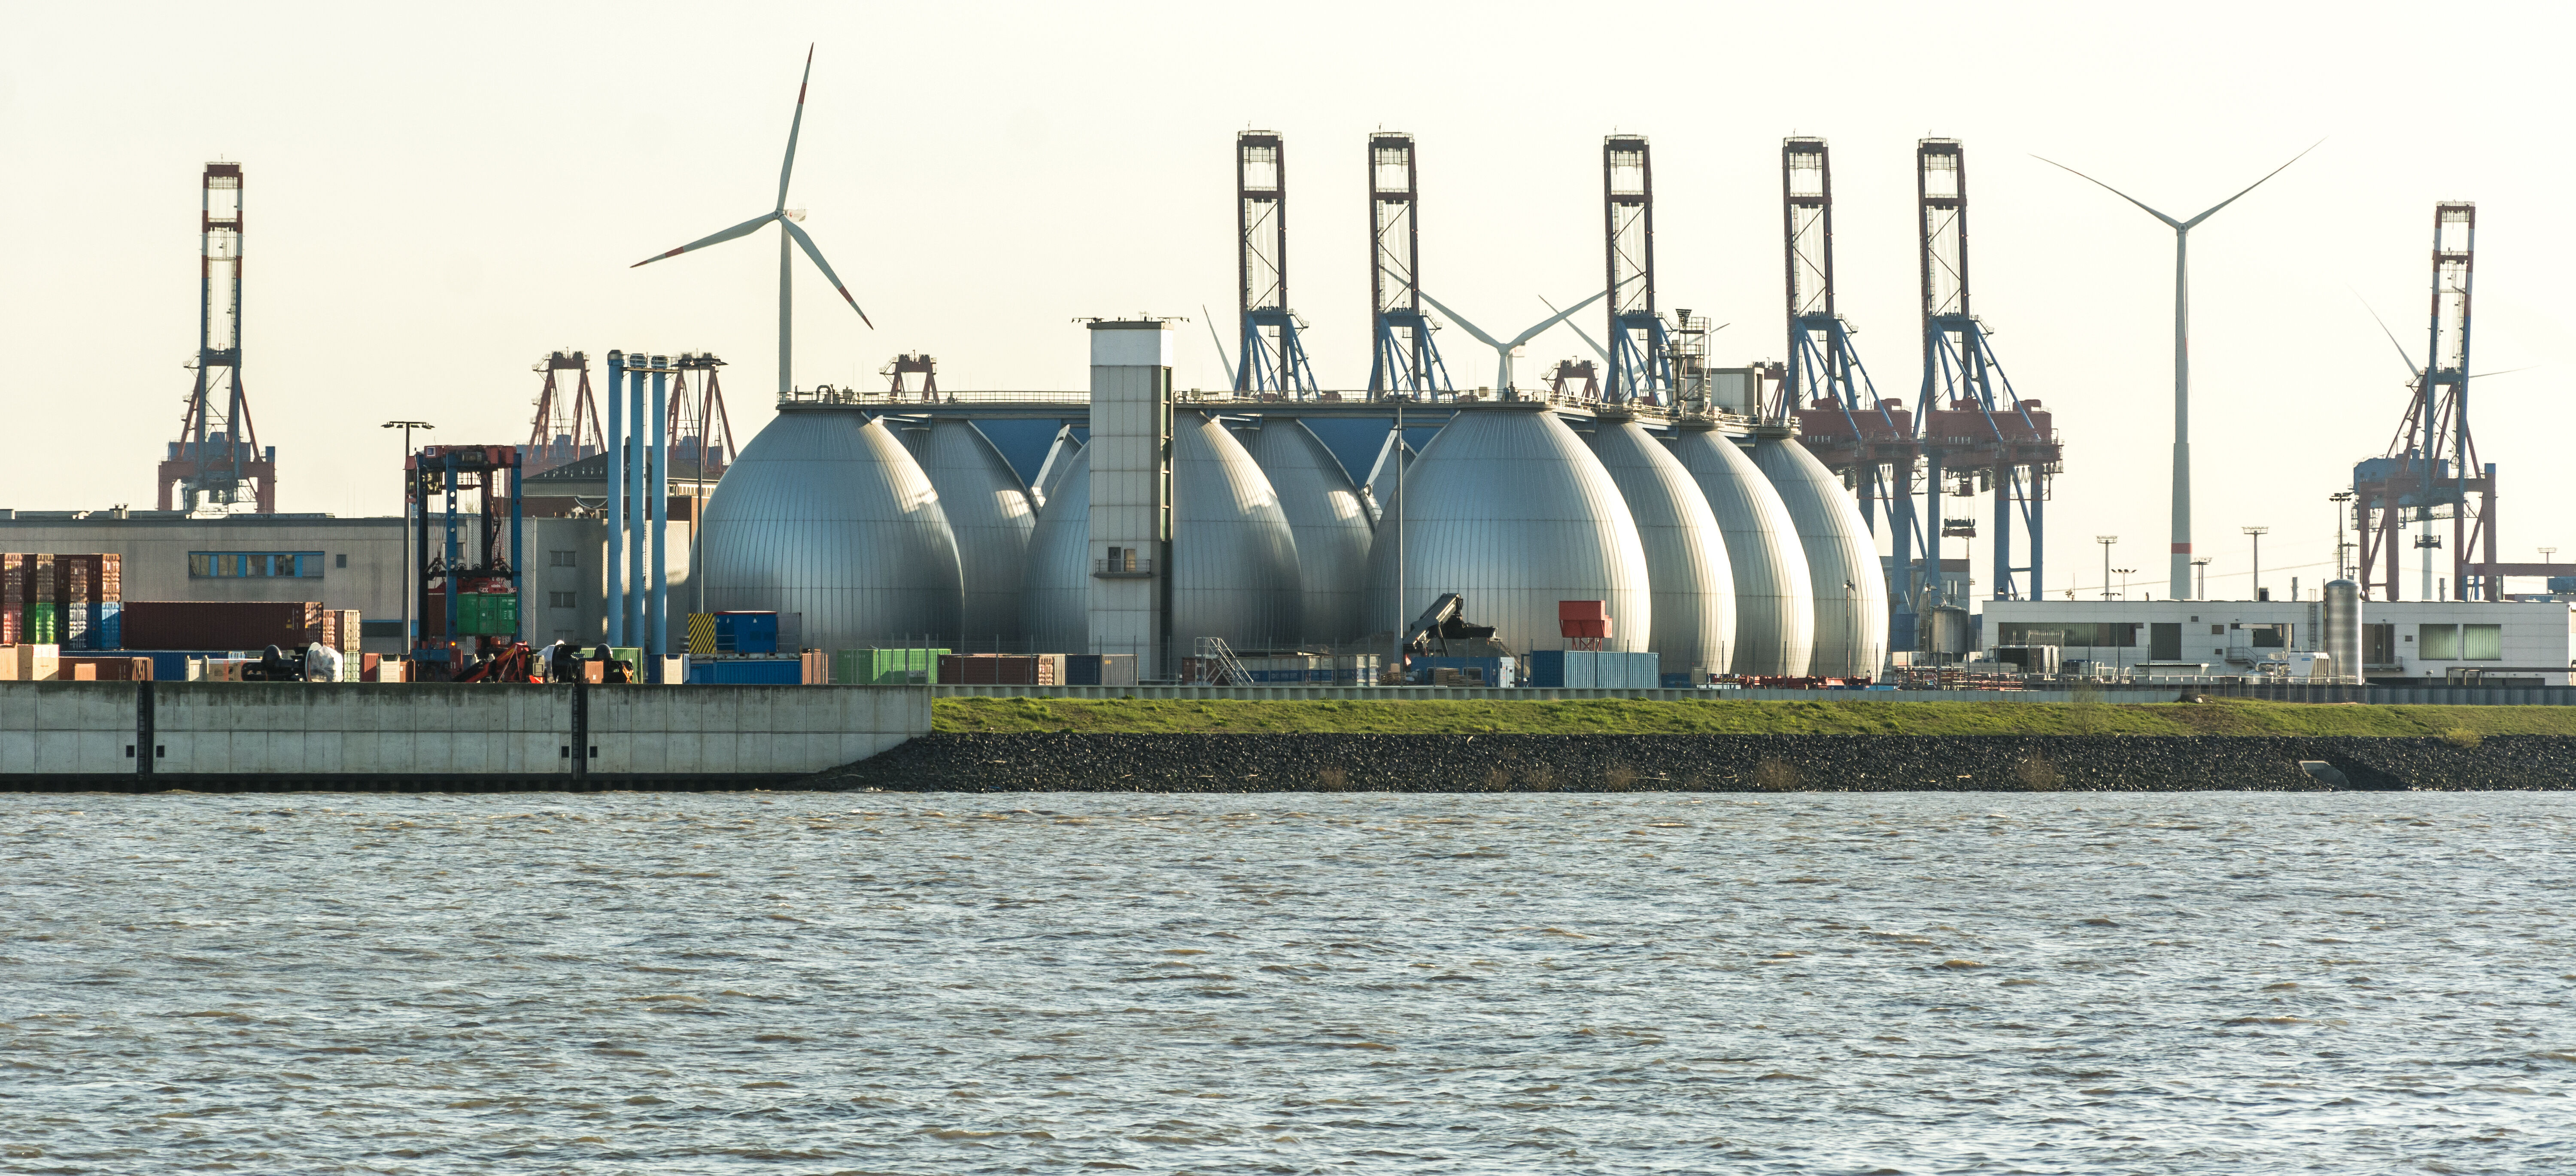 Gas storage reservoir, wind turbines and cranes in the harbour - Spray Nozzles for The Energy Industry